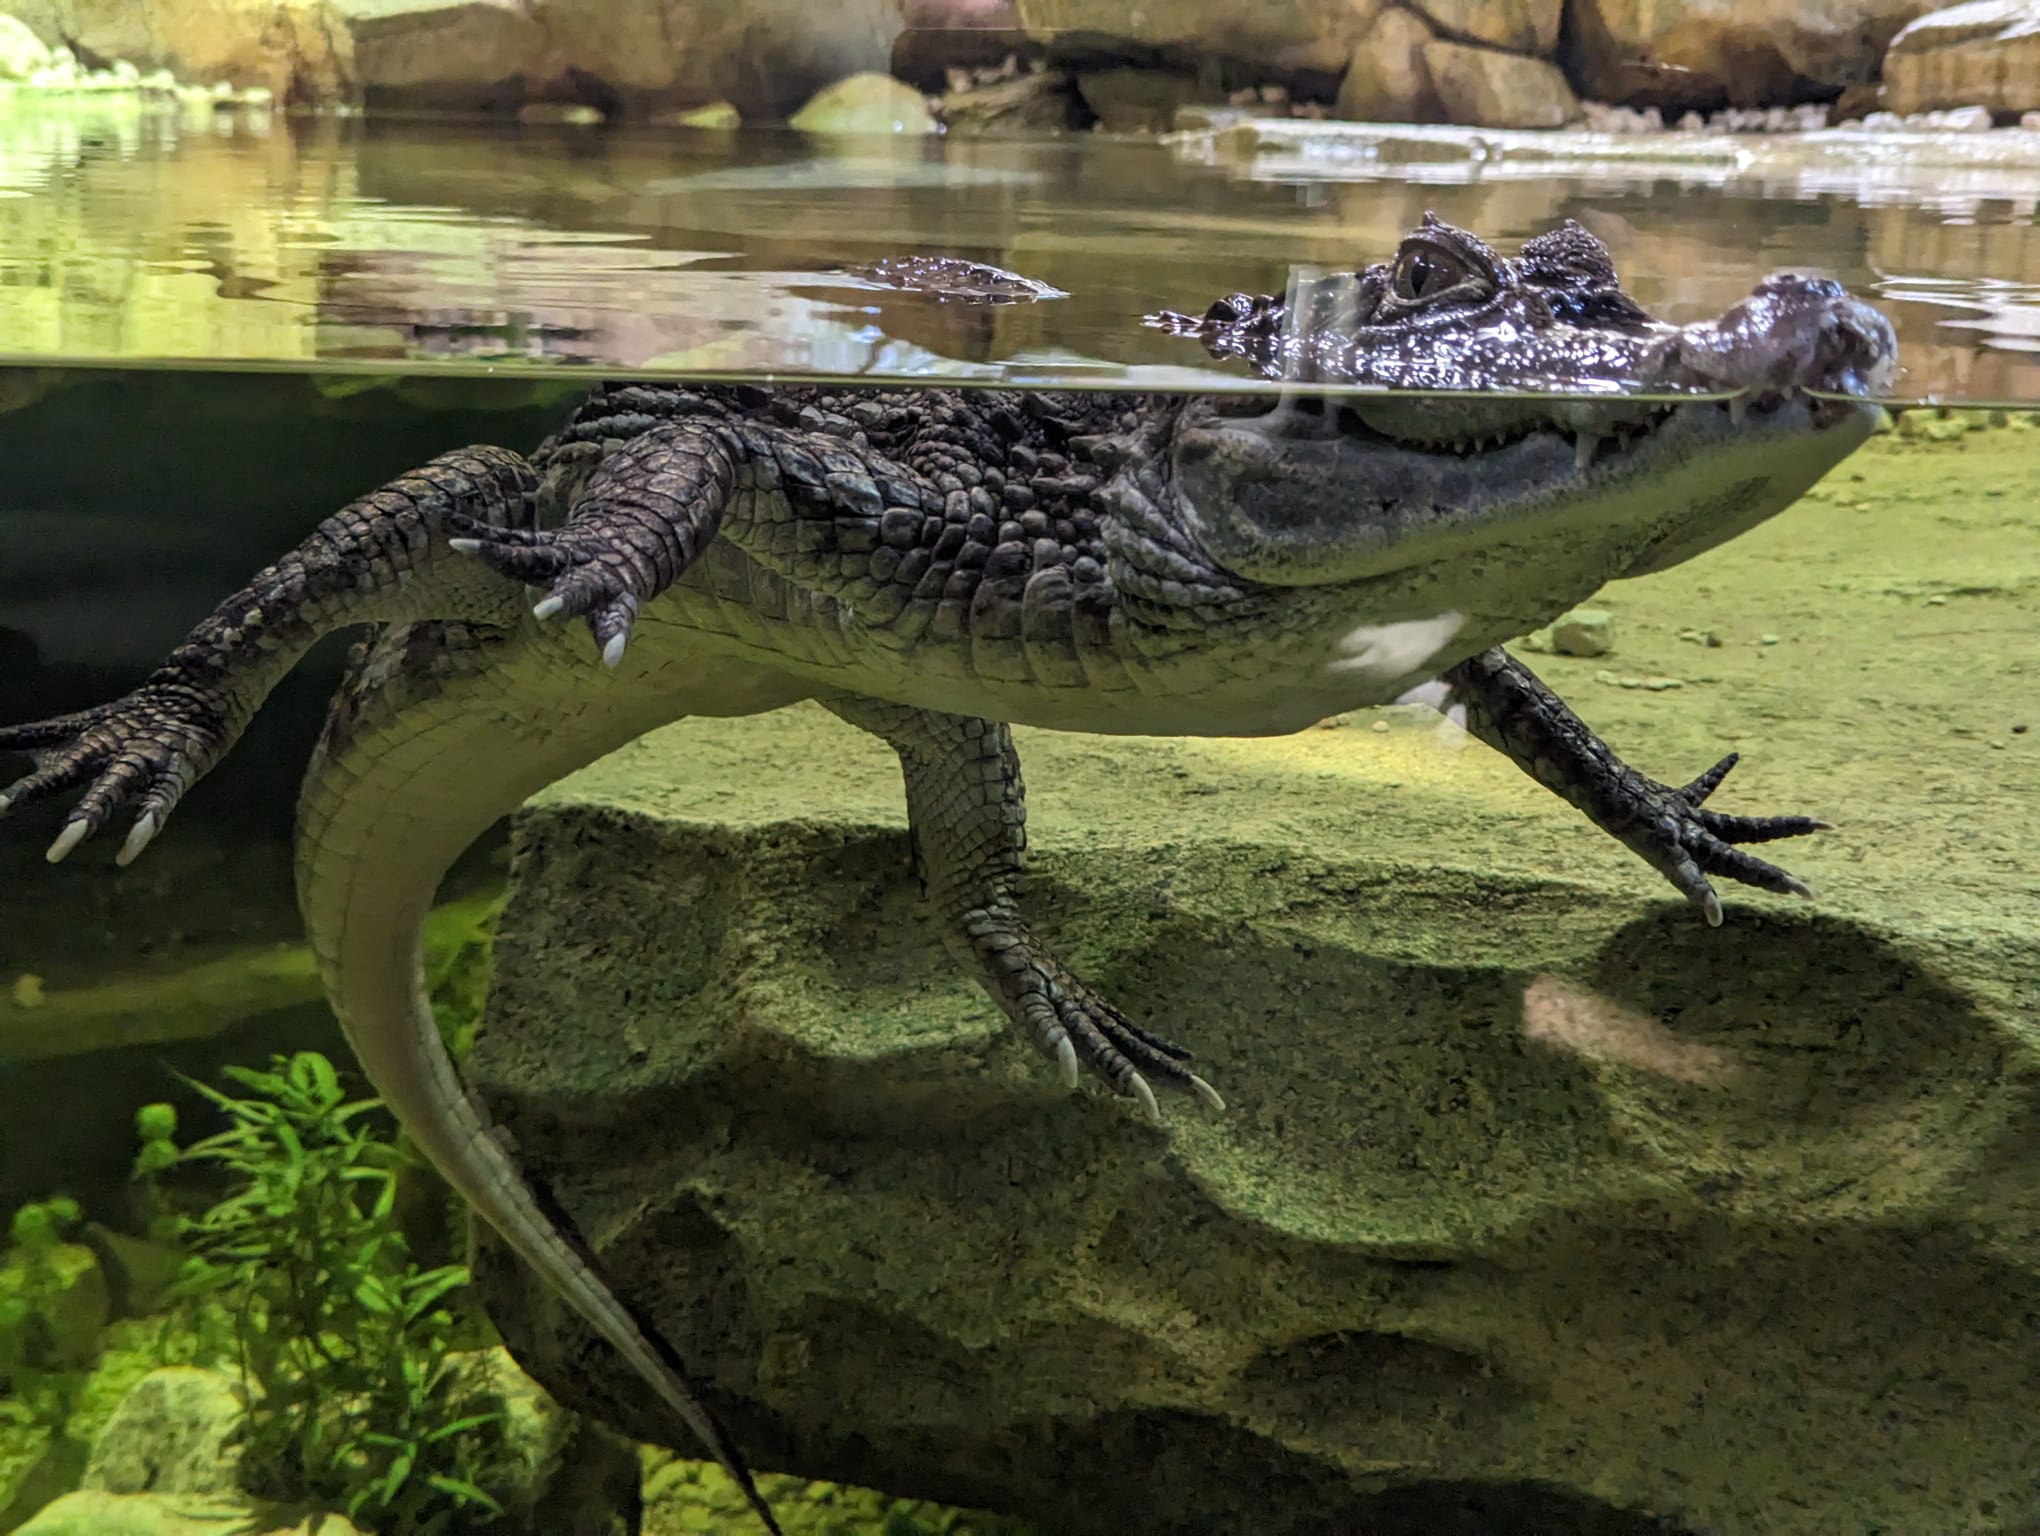 Stratford Butterfly Farm opens new ‘rainforest’ exhibition with Kenny the Caiman!